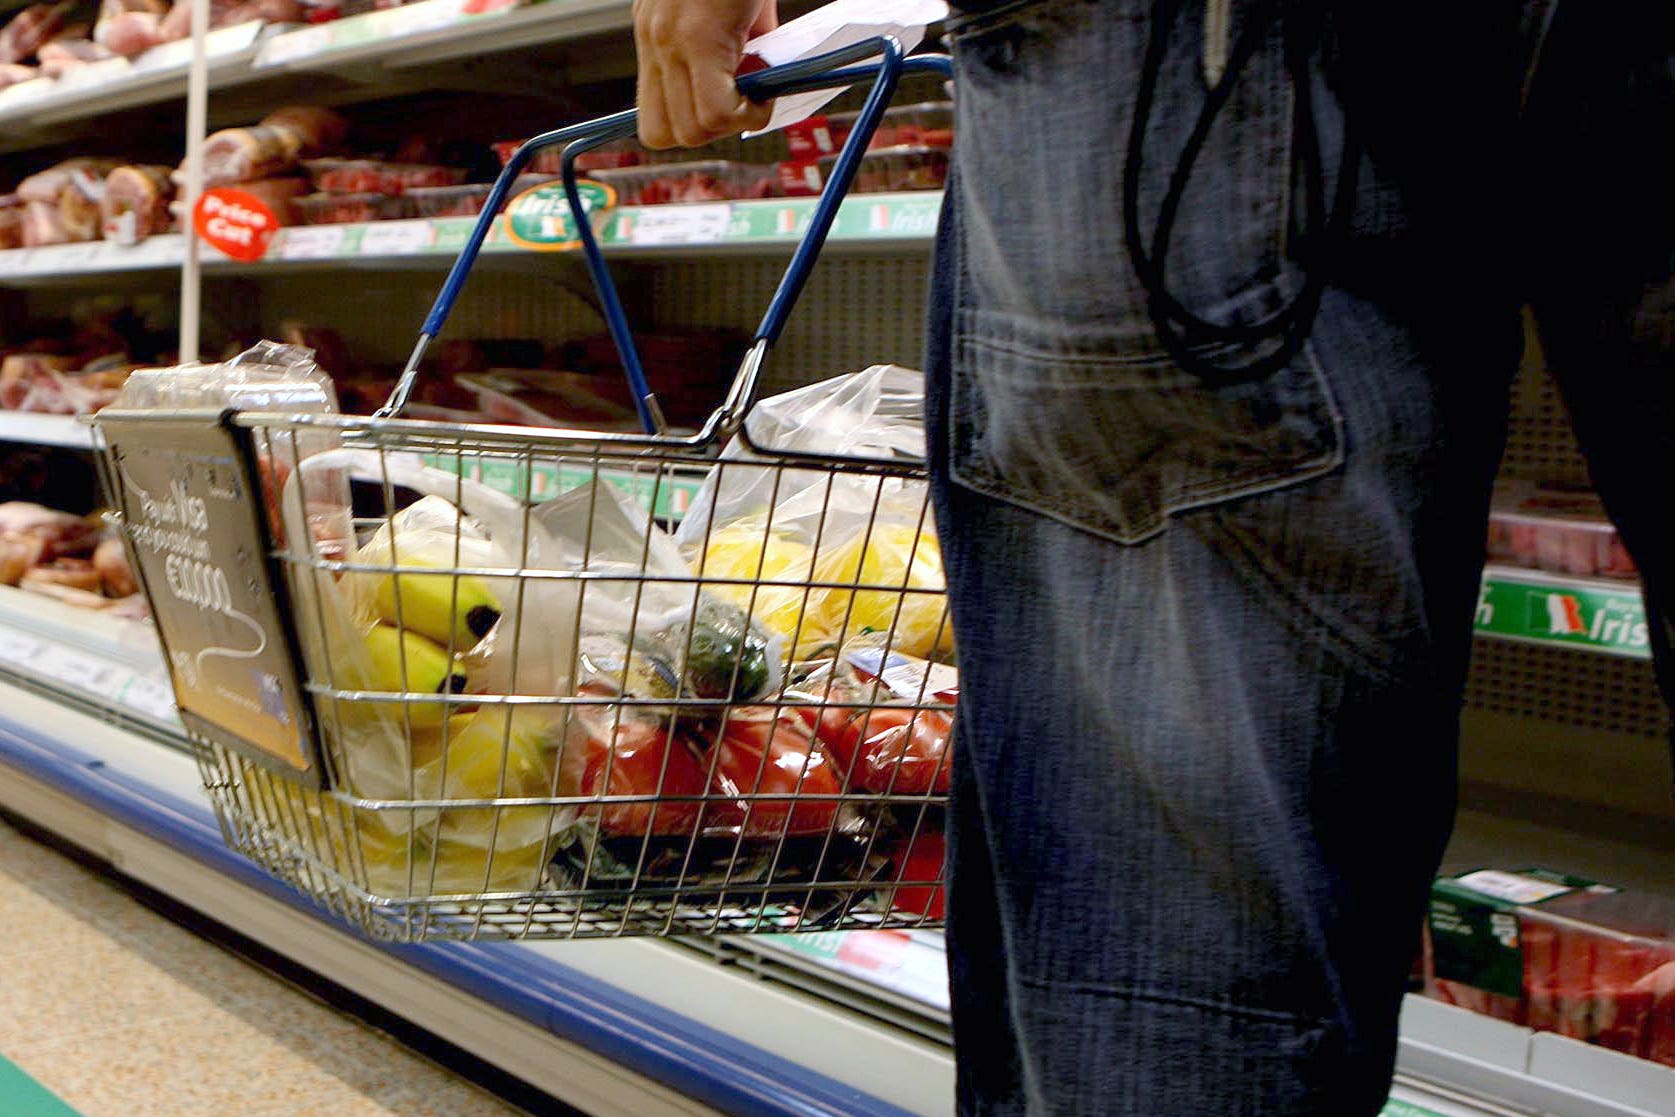 Downing Street aides are reportedly plotting a deal with supermarkets, similar to an agreement in France, where consumers are charged the lowest amount possible for food staples